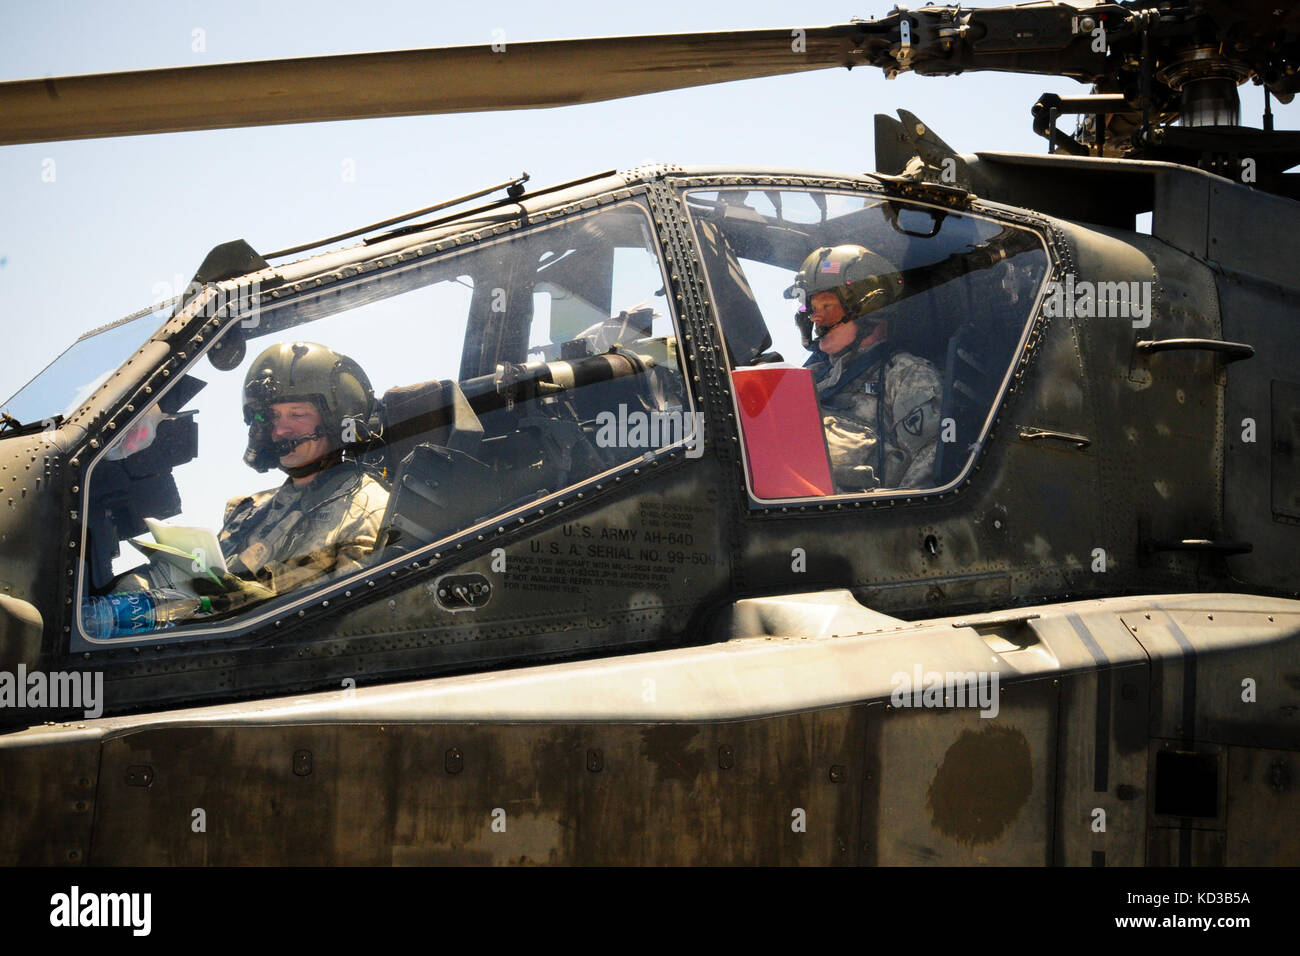 U.S. Army AH-64D Apache pilots assigned to S.C. Army National Guard’s 1/151 Attack Reconnaissance Battalion prepare to take-off at the forward arming and refueling point at Ft. Stewart, Ga., on May 4, 2014, to begin air-to-ground gunnery exercises as part of the unit’s annual training. Crews were tested with a variety of scenarios where they fired 30mm ammunition and point detonation rockets. (U.S. Army National Guard photo by. Sgt. Brian Calhoun/Released) Stock Photo